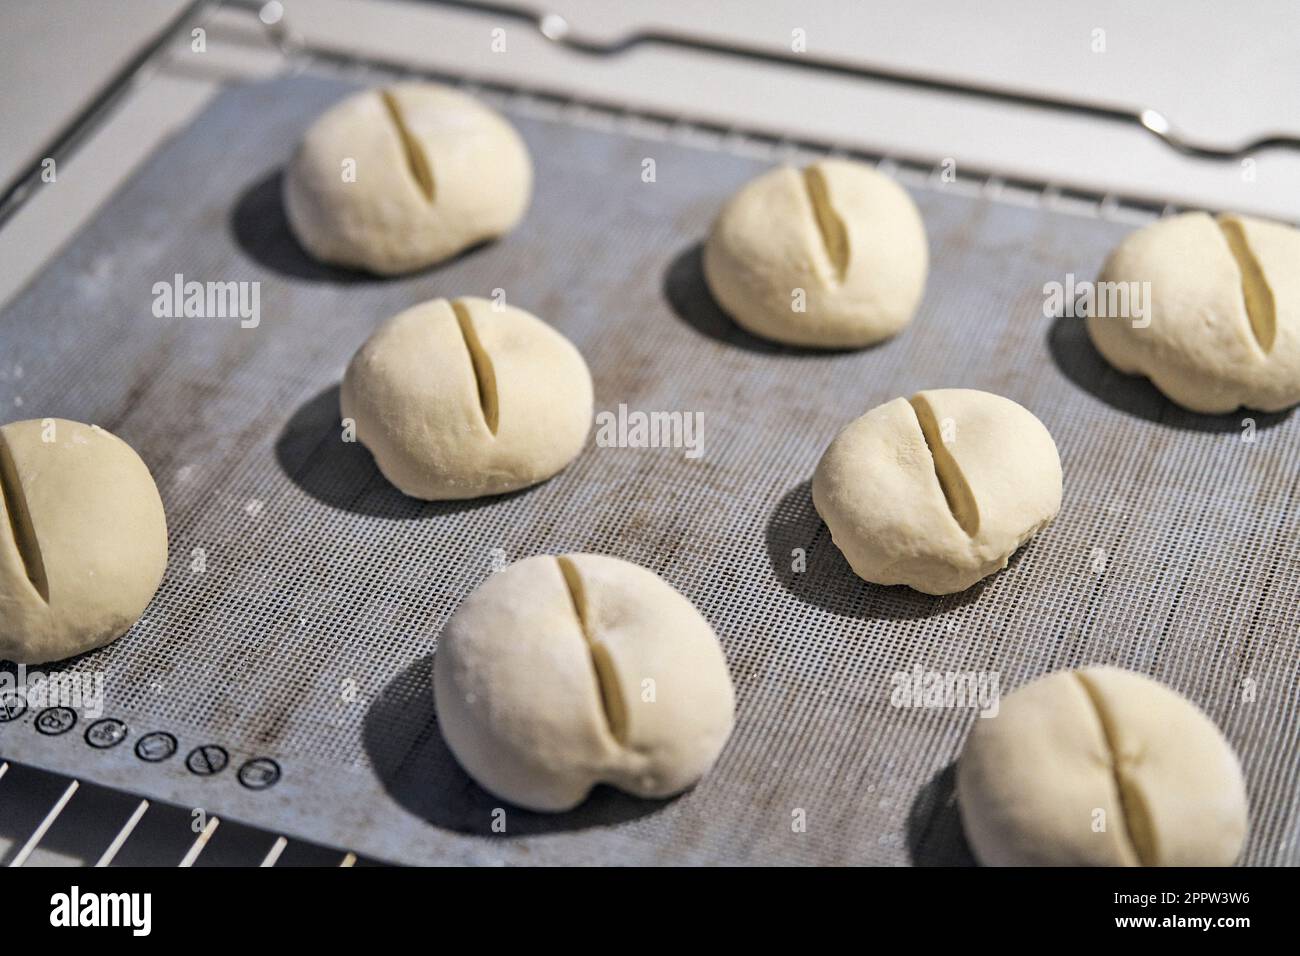 Cut bread roll dough on cookie sheet Stock Photo